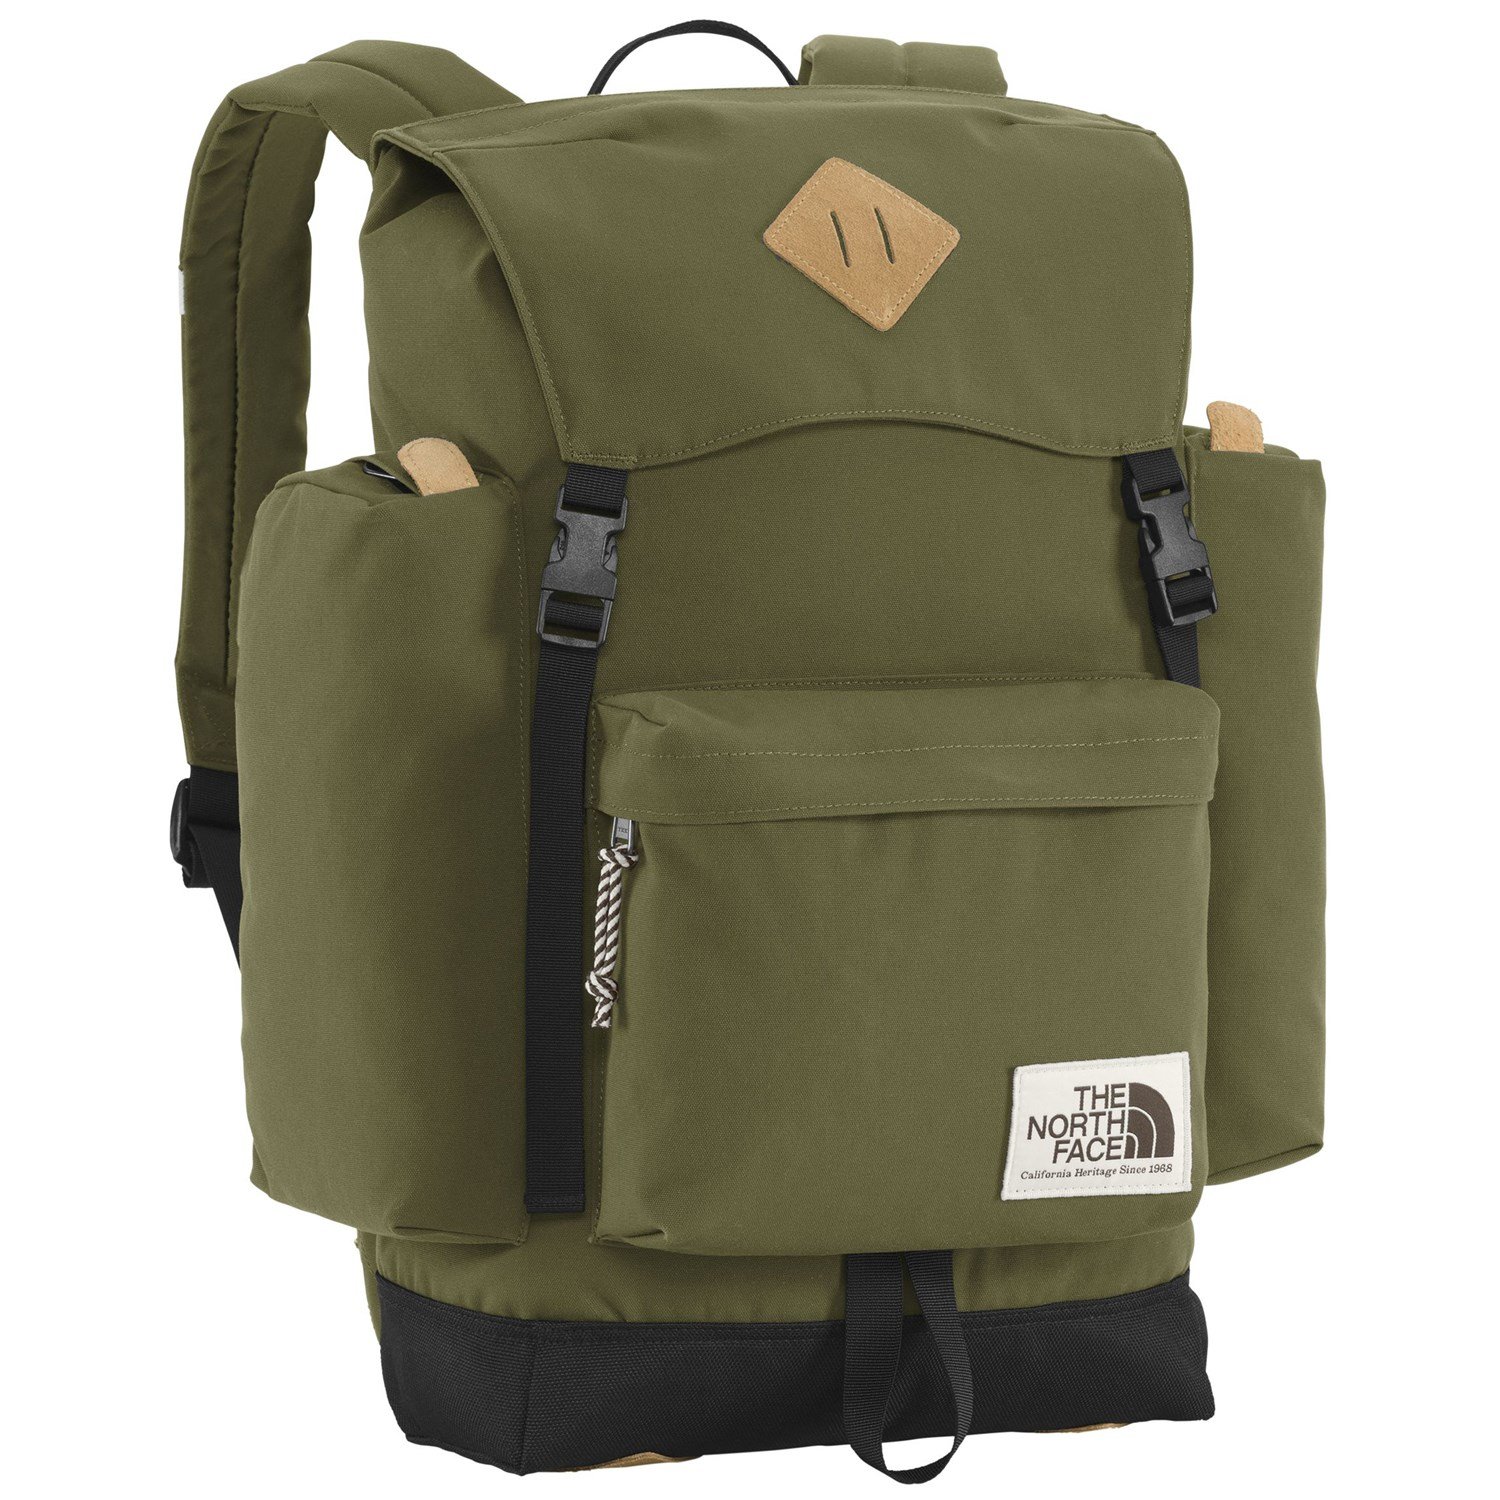 The North Face Rucksack Backpack |